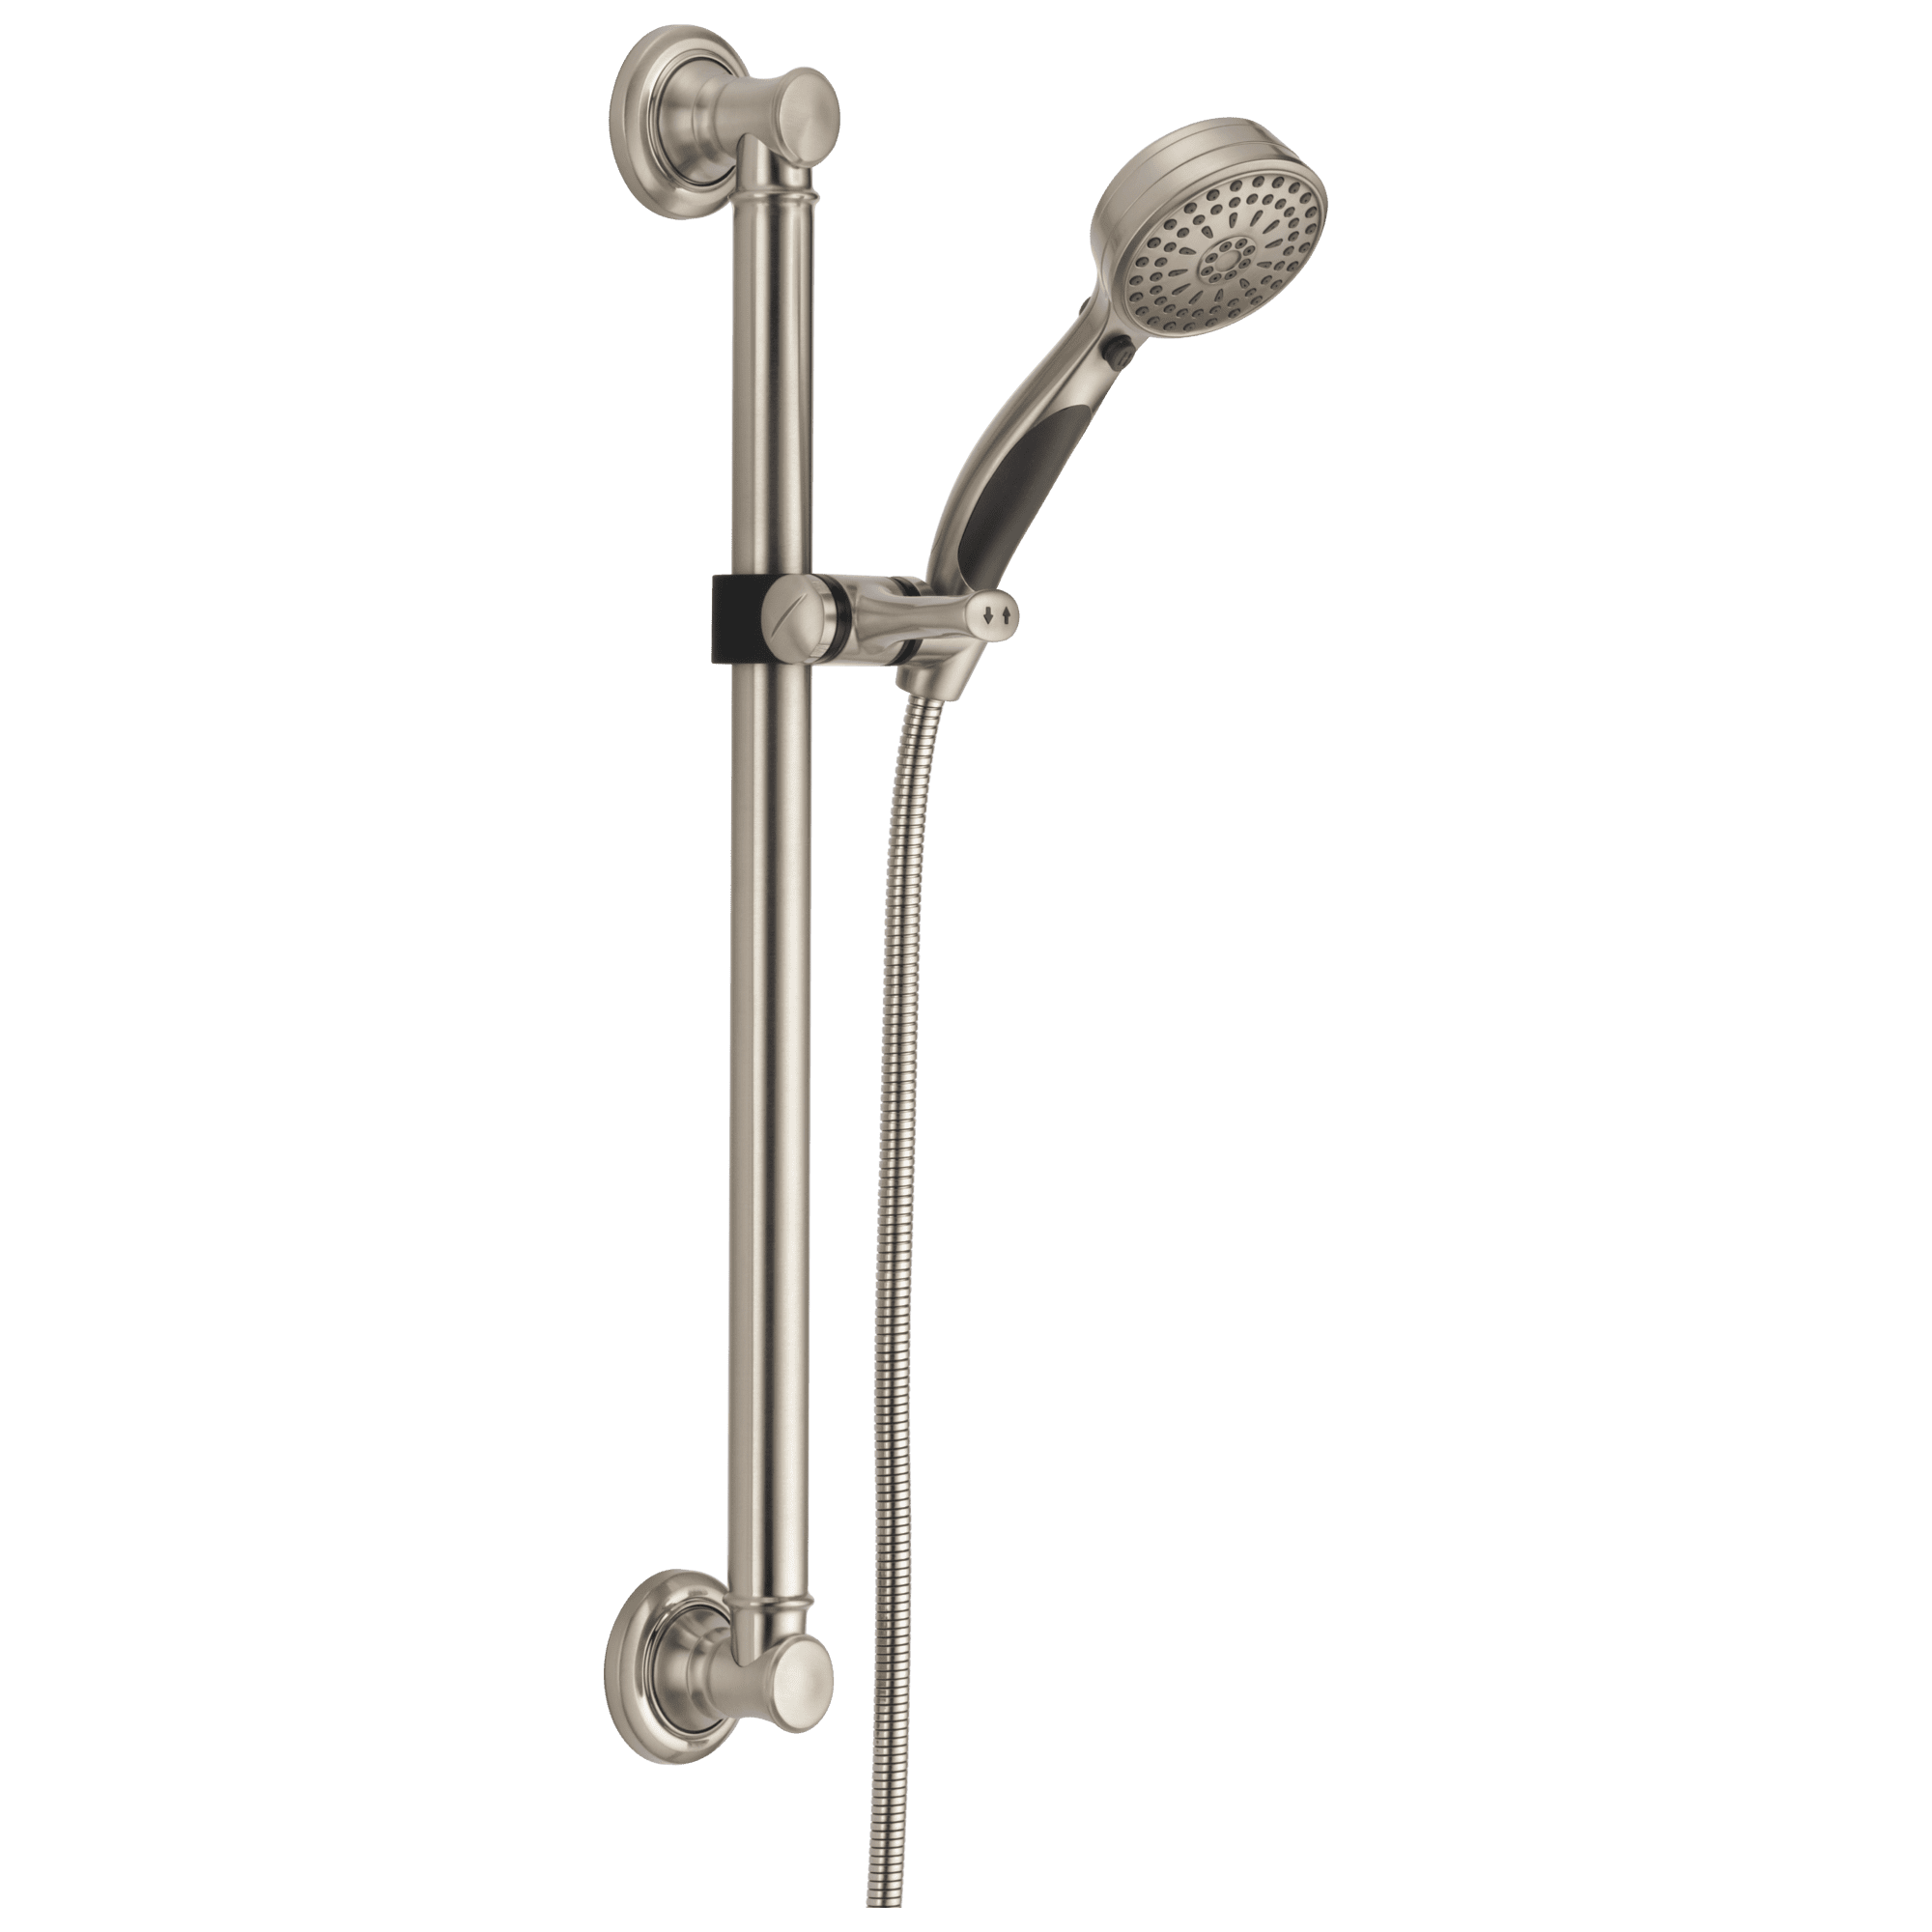 51900-ss Decorative Ada Shower Kit Traditional - Stainless Steel